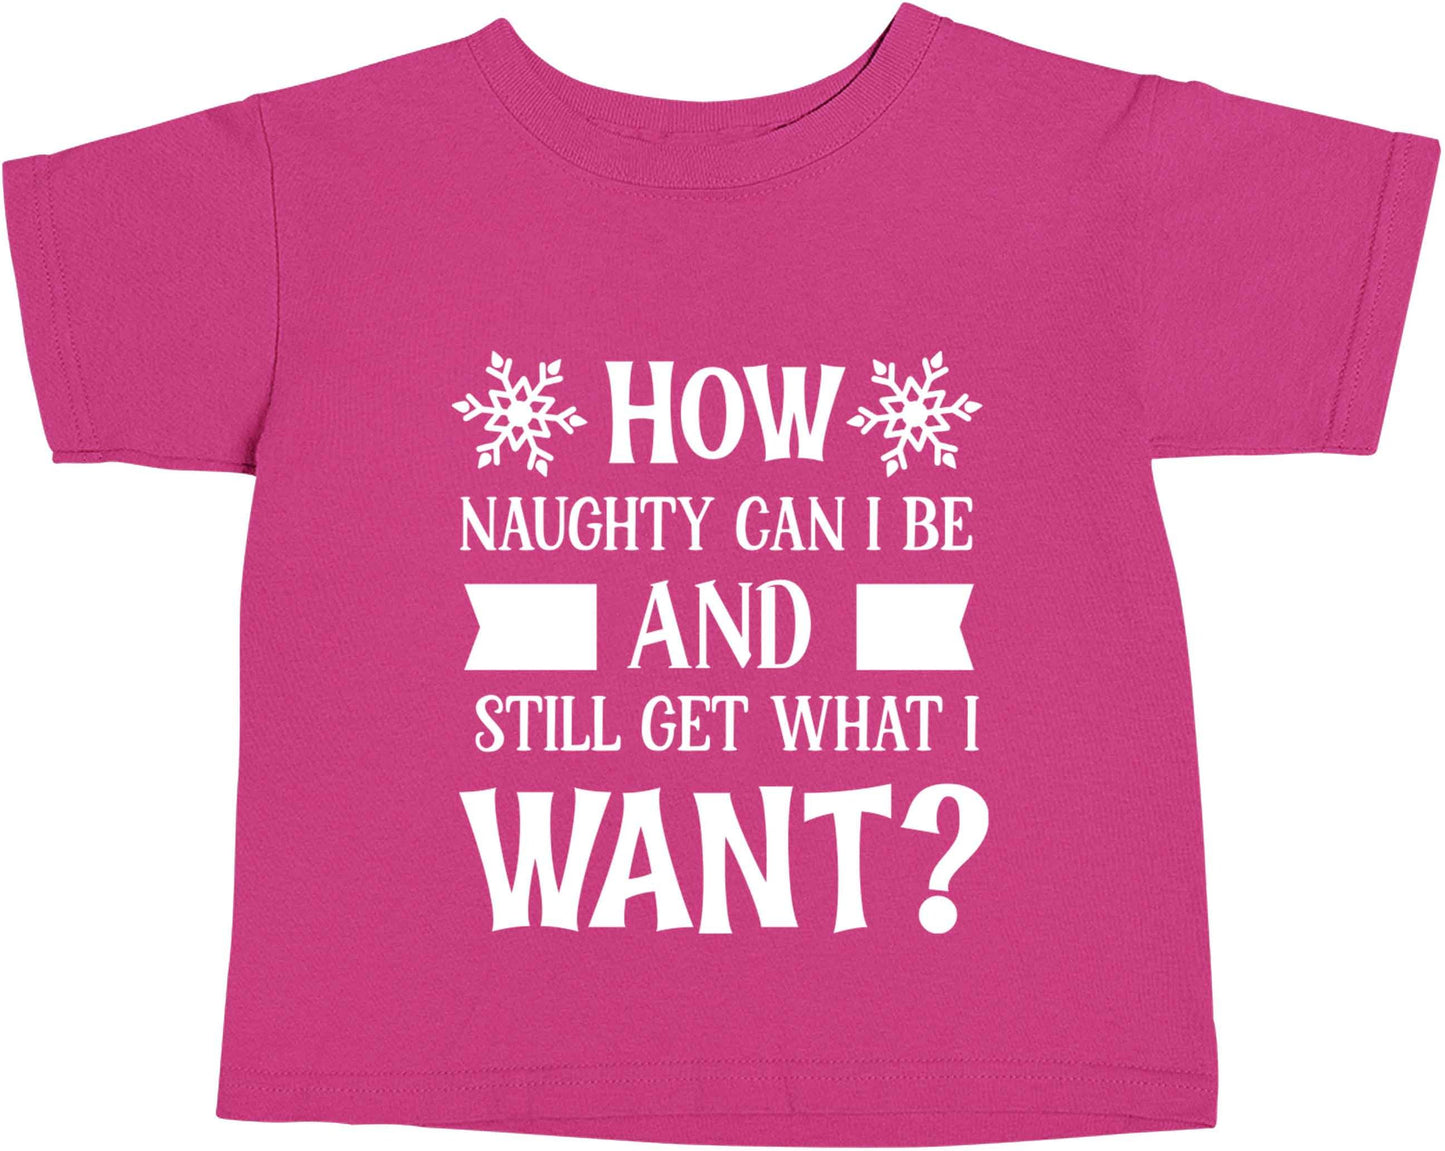 How naughty can I be and still get what I want? pink baby toddler Tshirt 2 Years